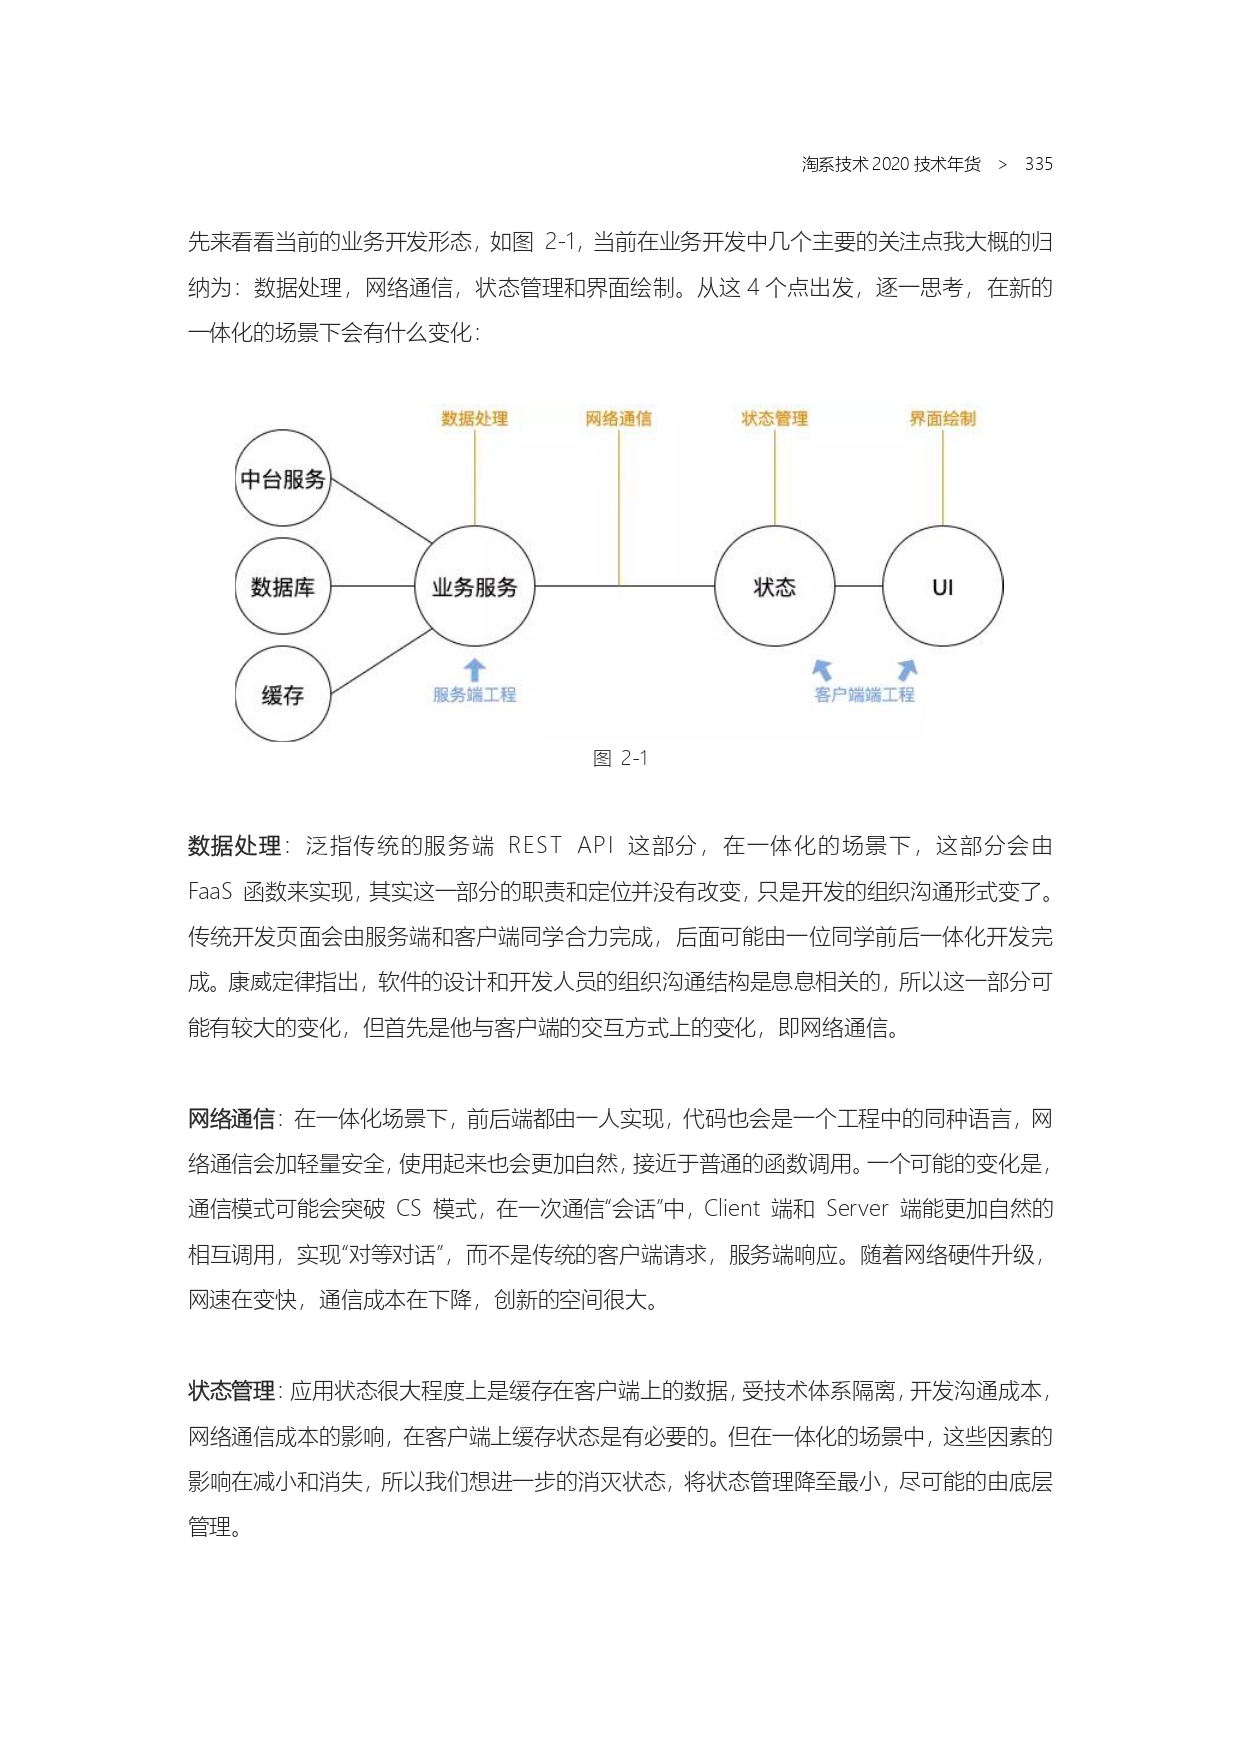 The Complete Works of Tao Technology 2020-1-570_page-0335.jpg